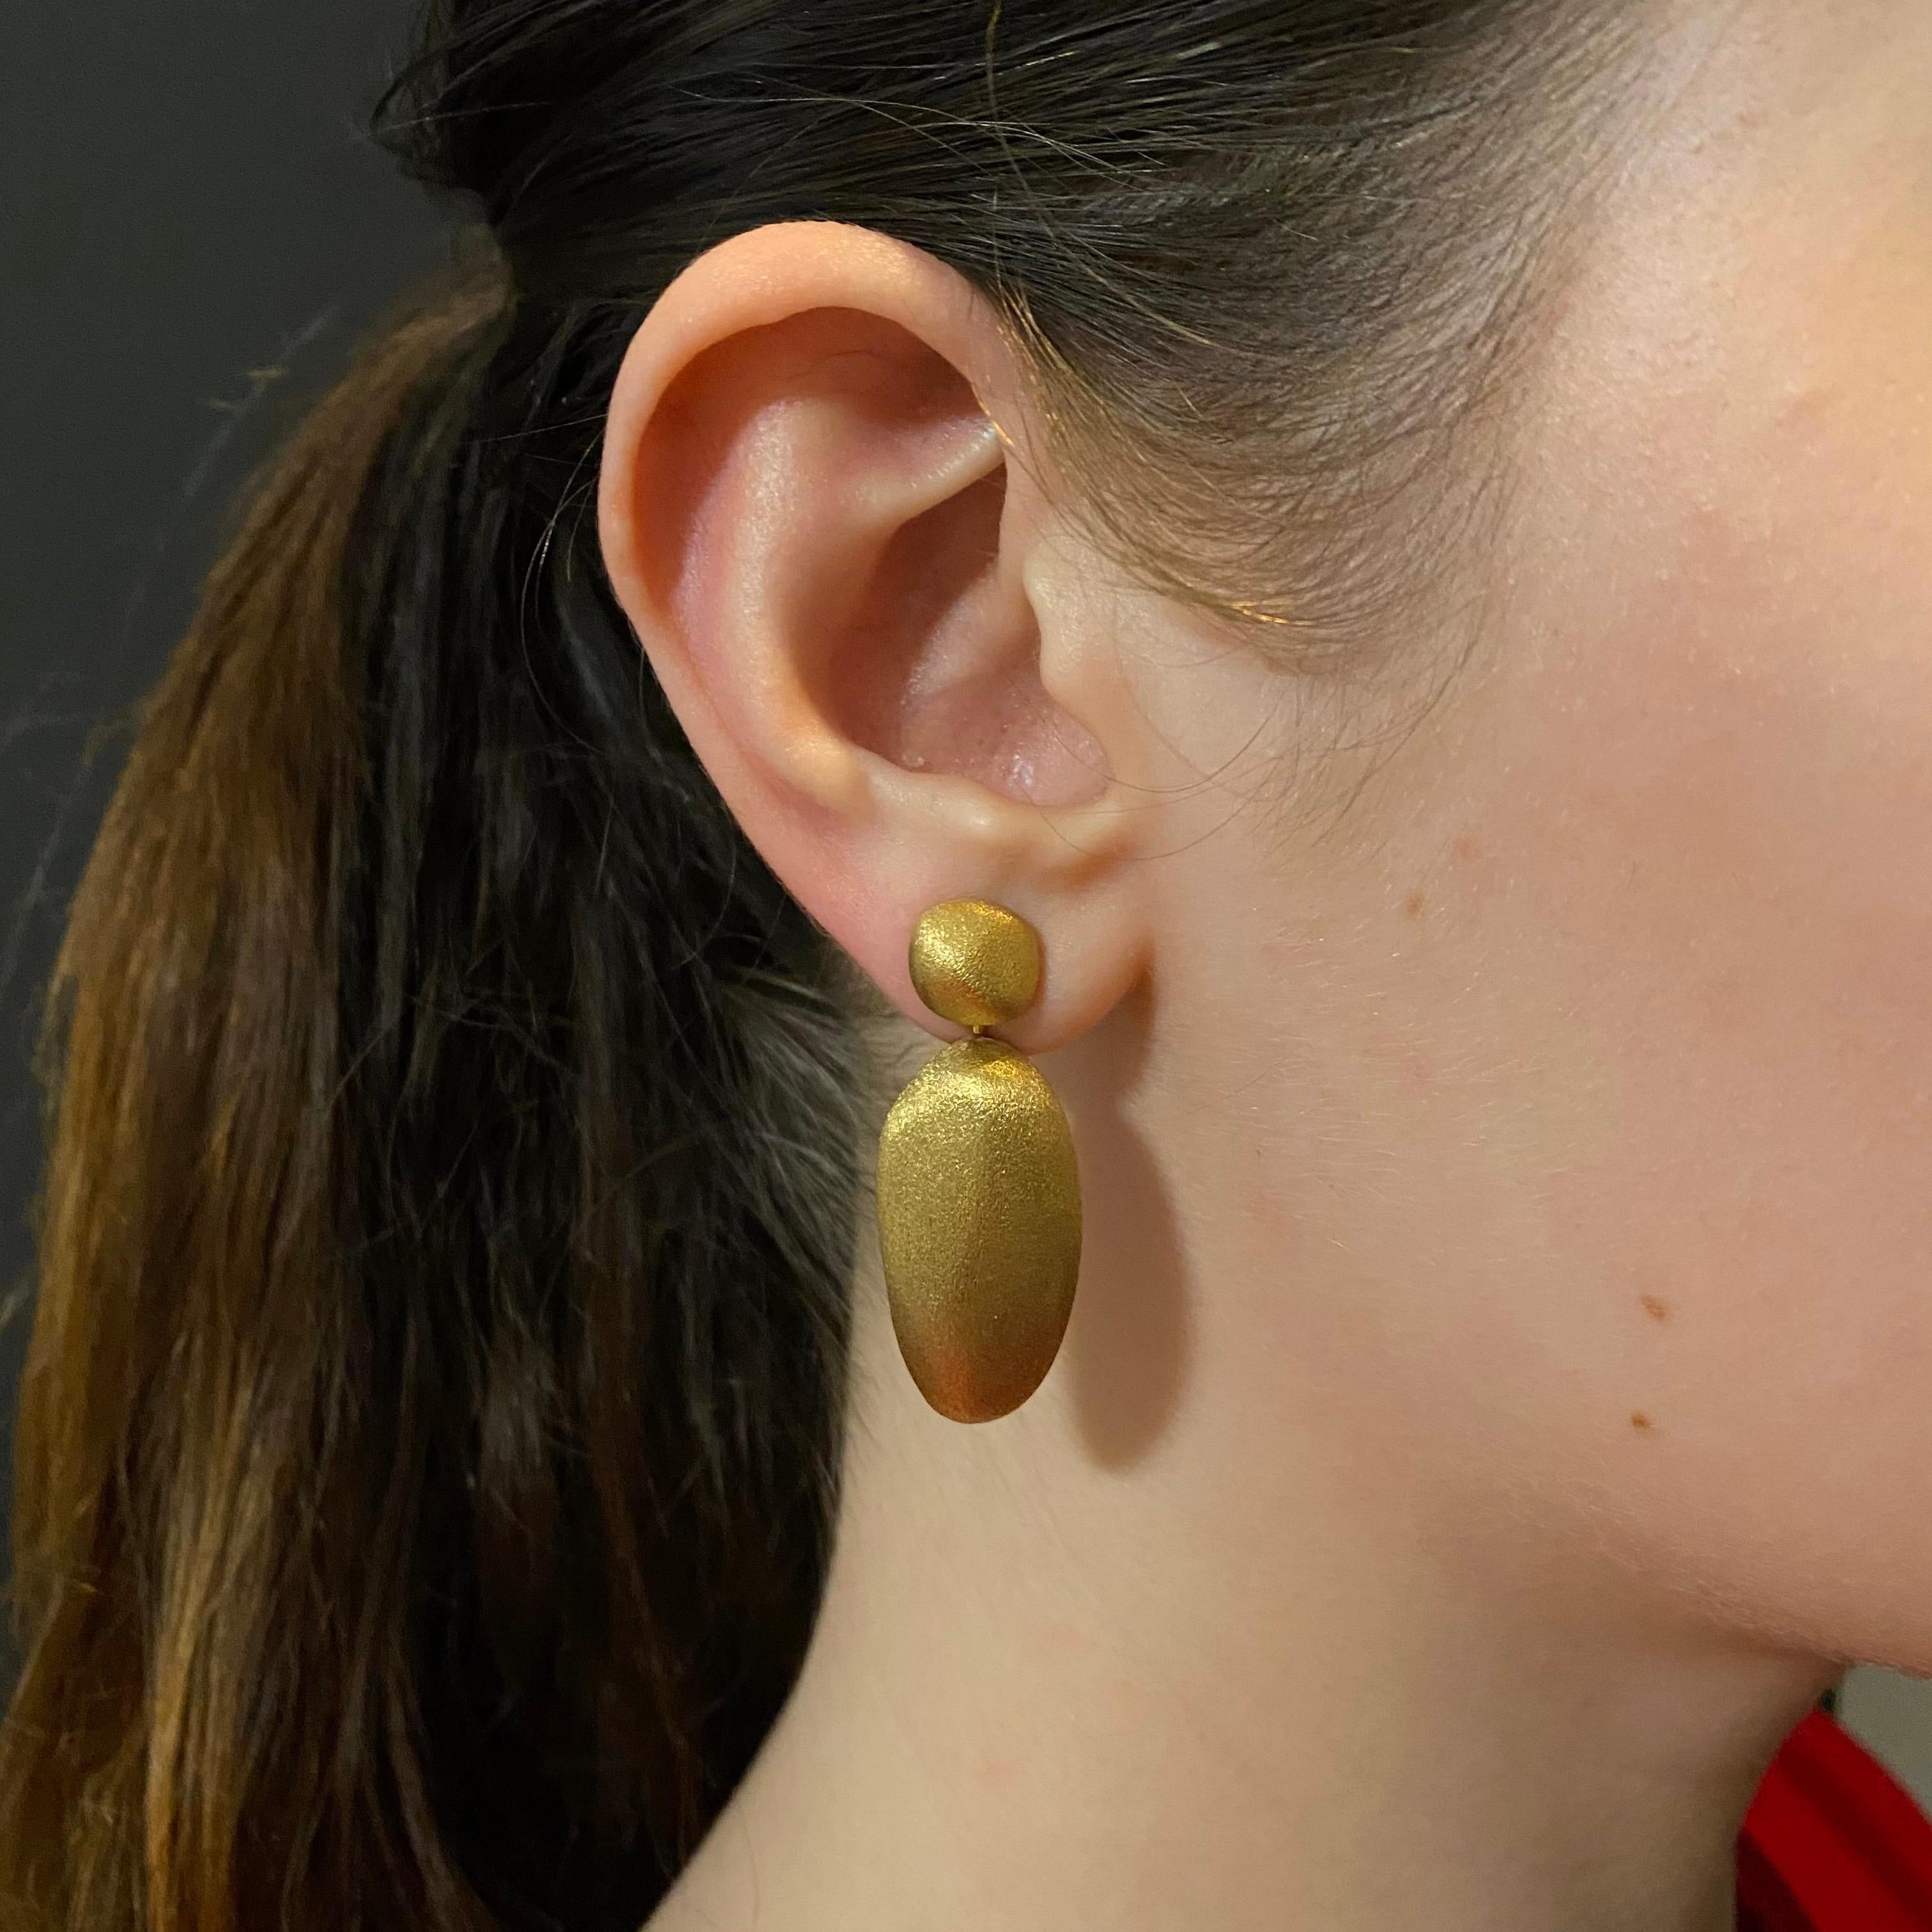 Pair of H. Stern Day-and-Night Convertible Textured Golden Stones Removable Drop Earrings in 18 Karat Yellow Gold, Brazil, 2000s. Each earring is designed as smaller unevenly shaped textured gold pebble suspending a larger elongated one, the stones